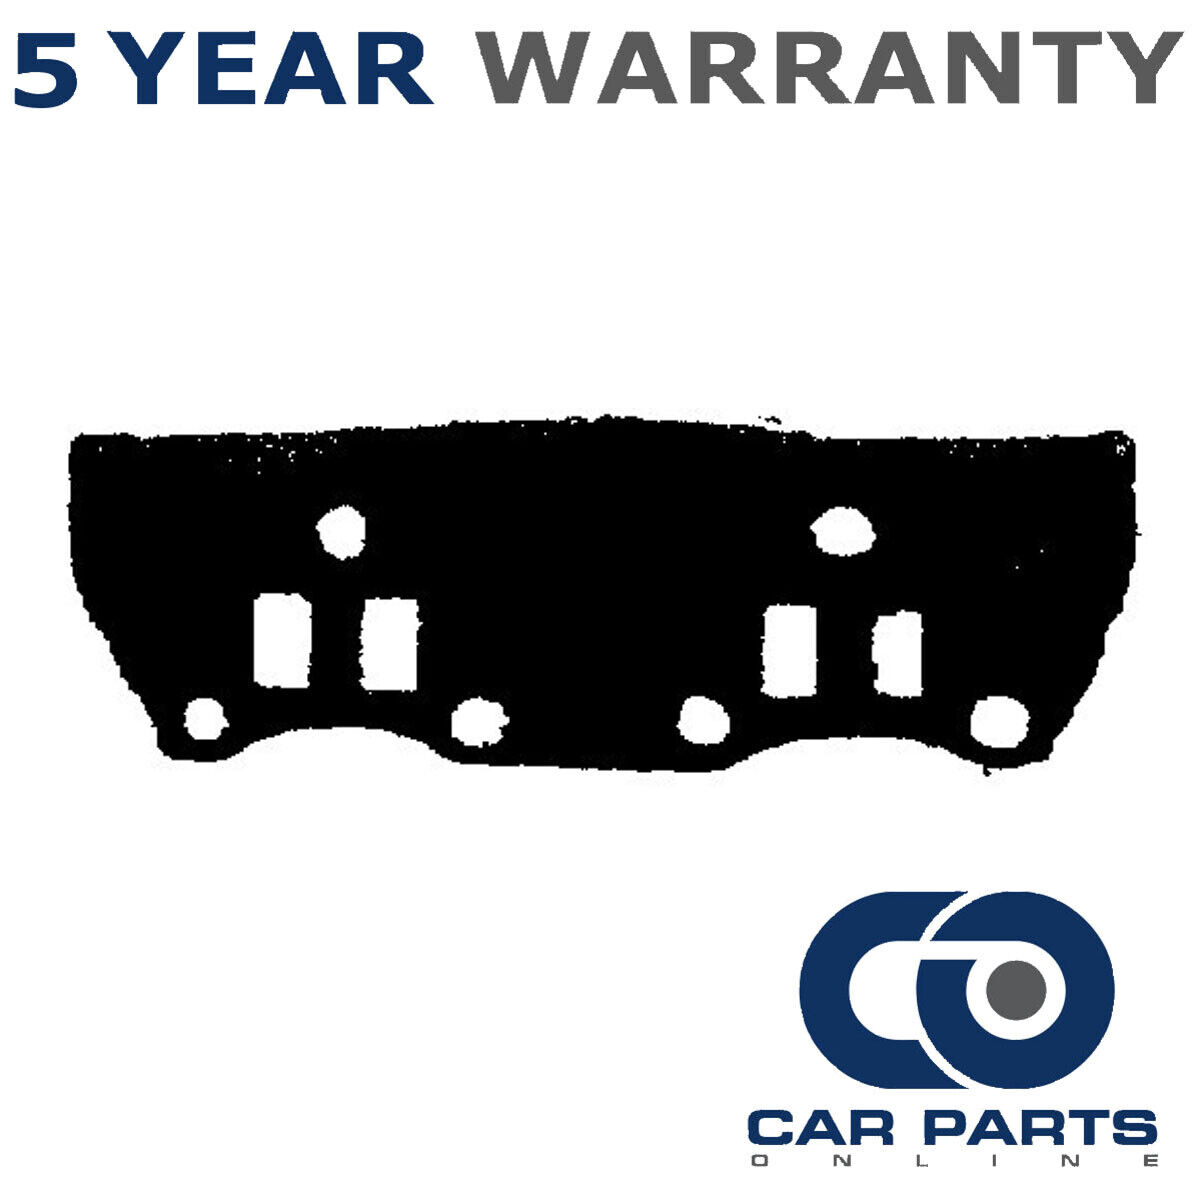 Exhaust Manifold Gasket CPO Fits Colt Compact Wira Satria 1.3 1.5 MD150525